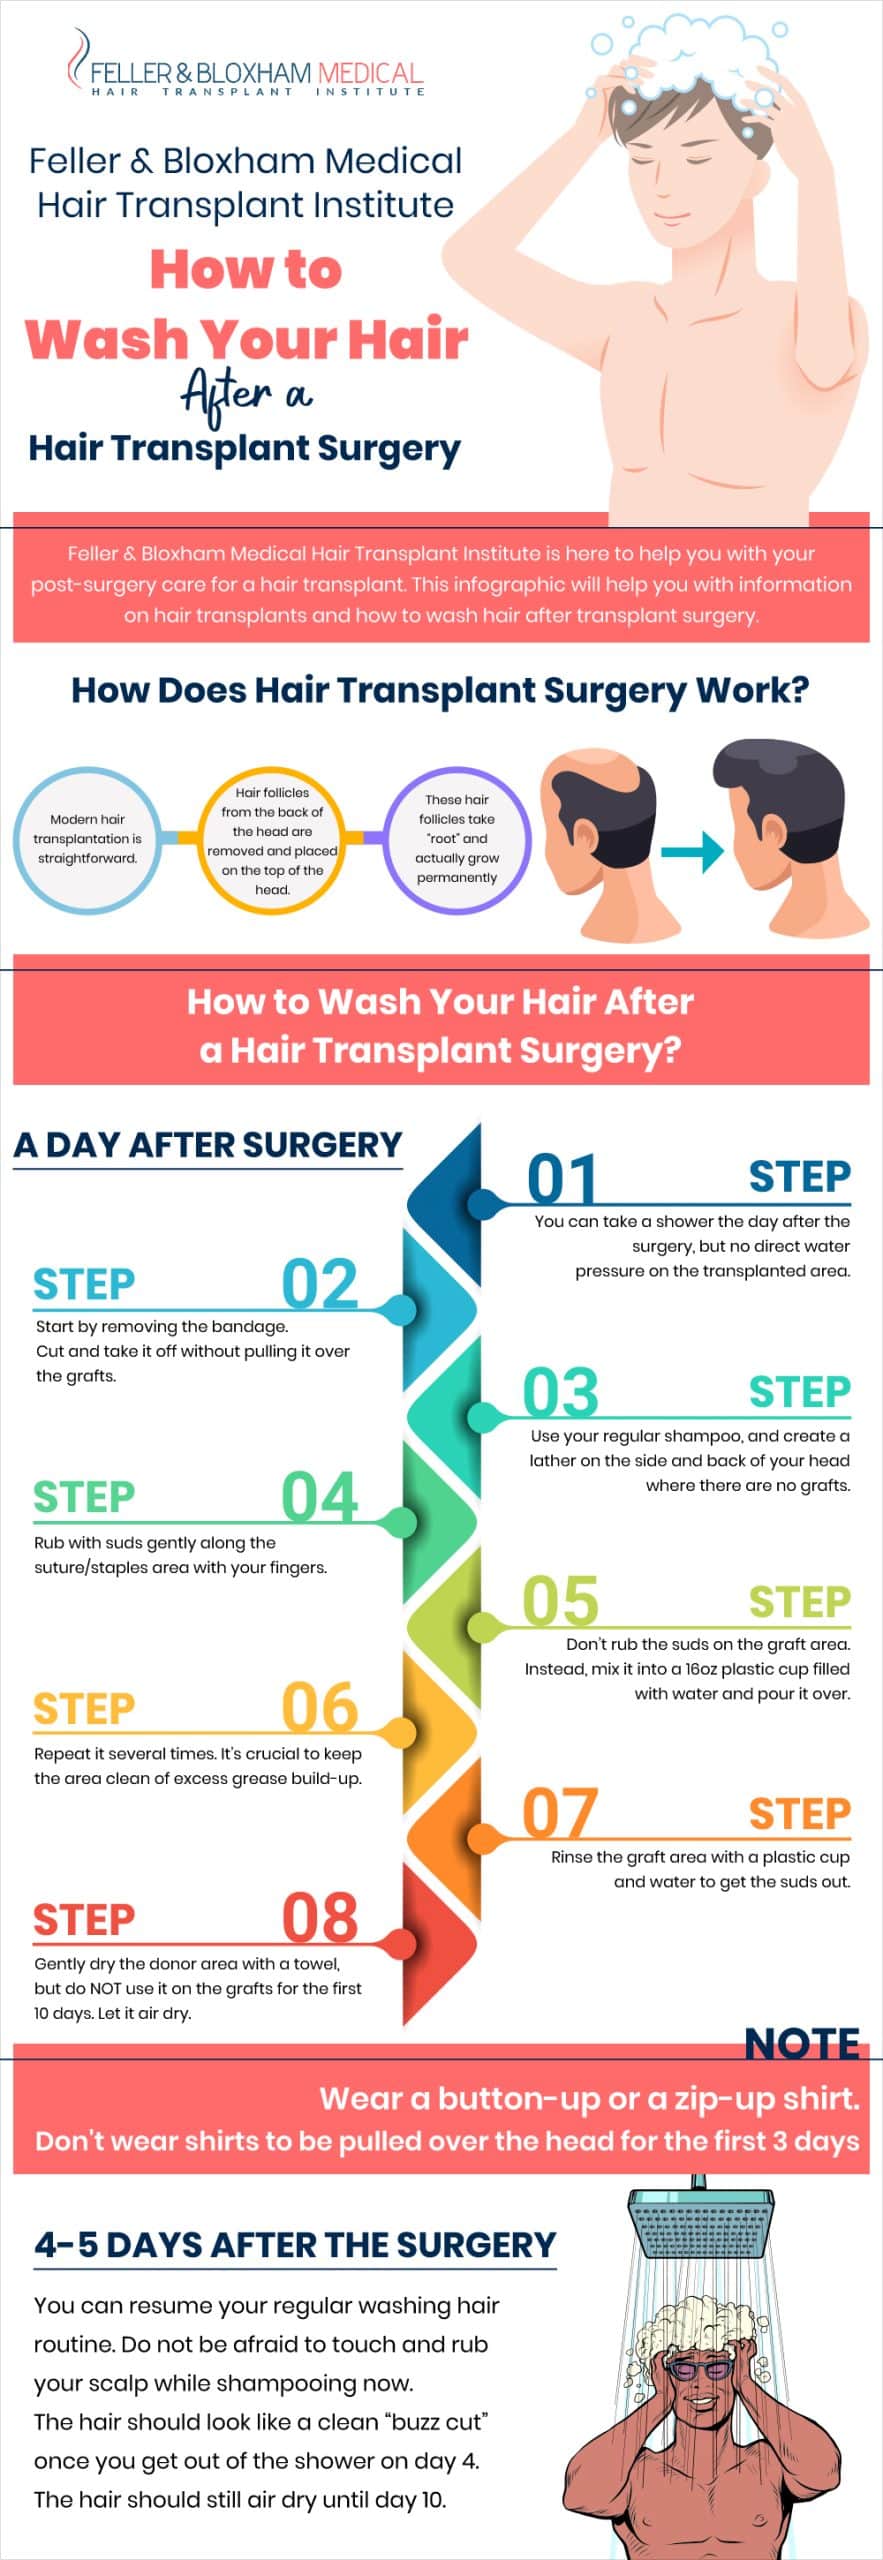 How to Wash Your Hair After a Hair Transplant Surgery